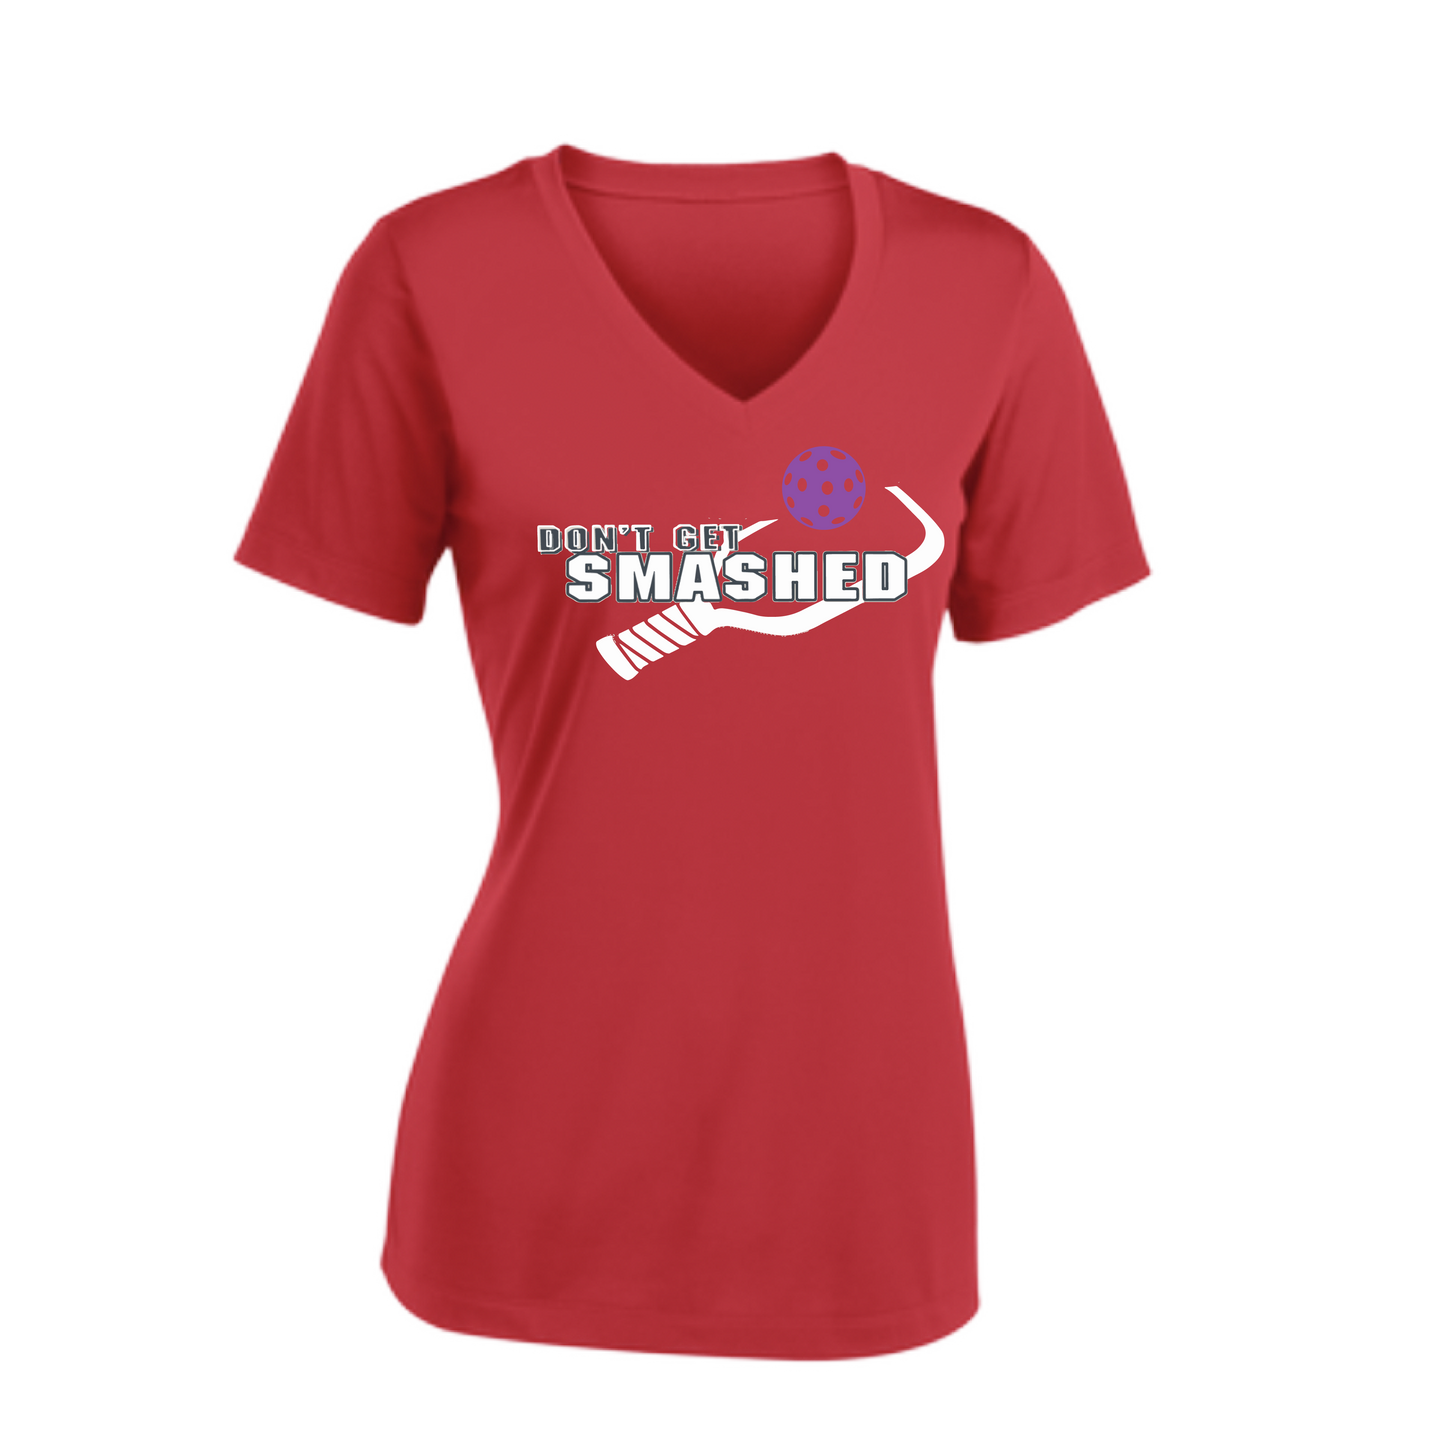 This Women's pickleball shirt offers a supreme blend of softness and style. Its moisture-wicking fabric is lightweight and breathable, while PosiCharge technology ensures long-lasting colors. Enjoy ultimate comfort and wearability.